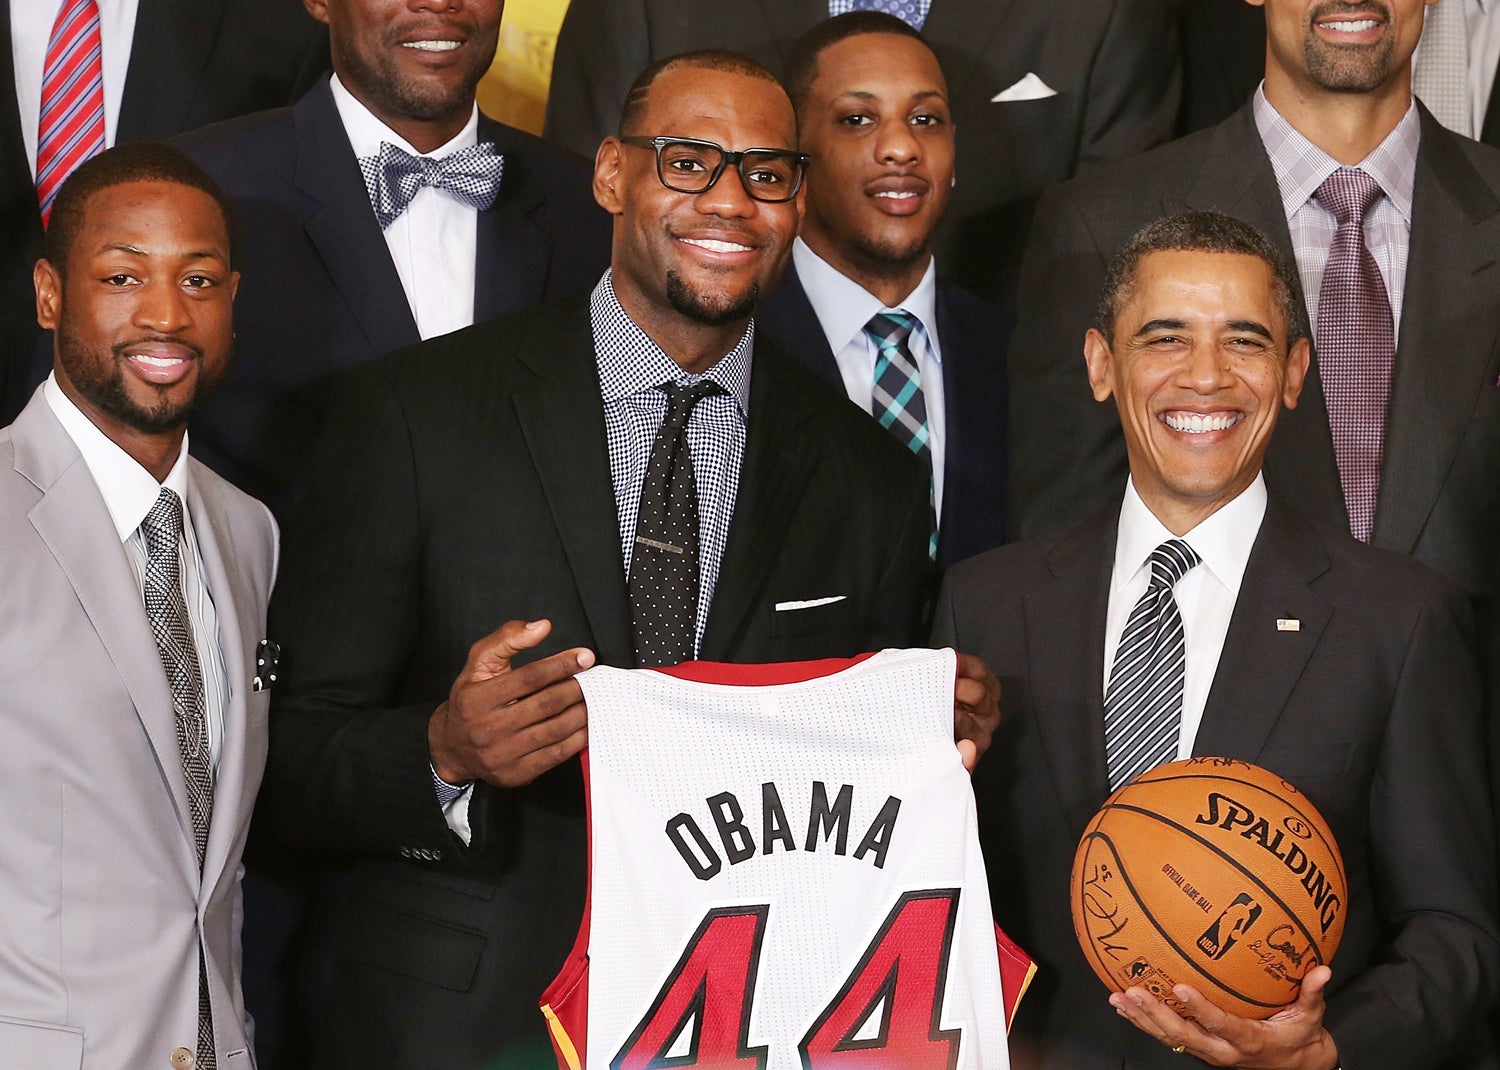 Obama Honors Miami Heat, Receives Job Offer